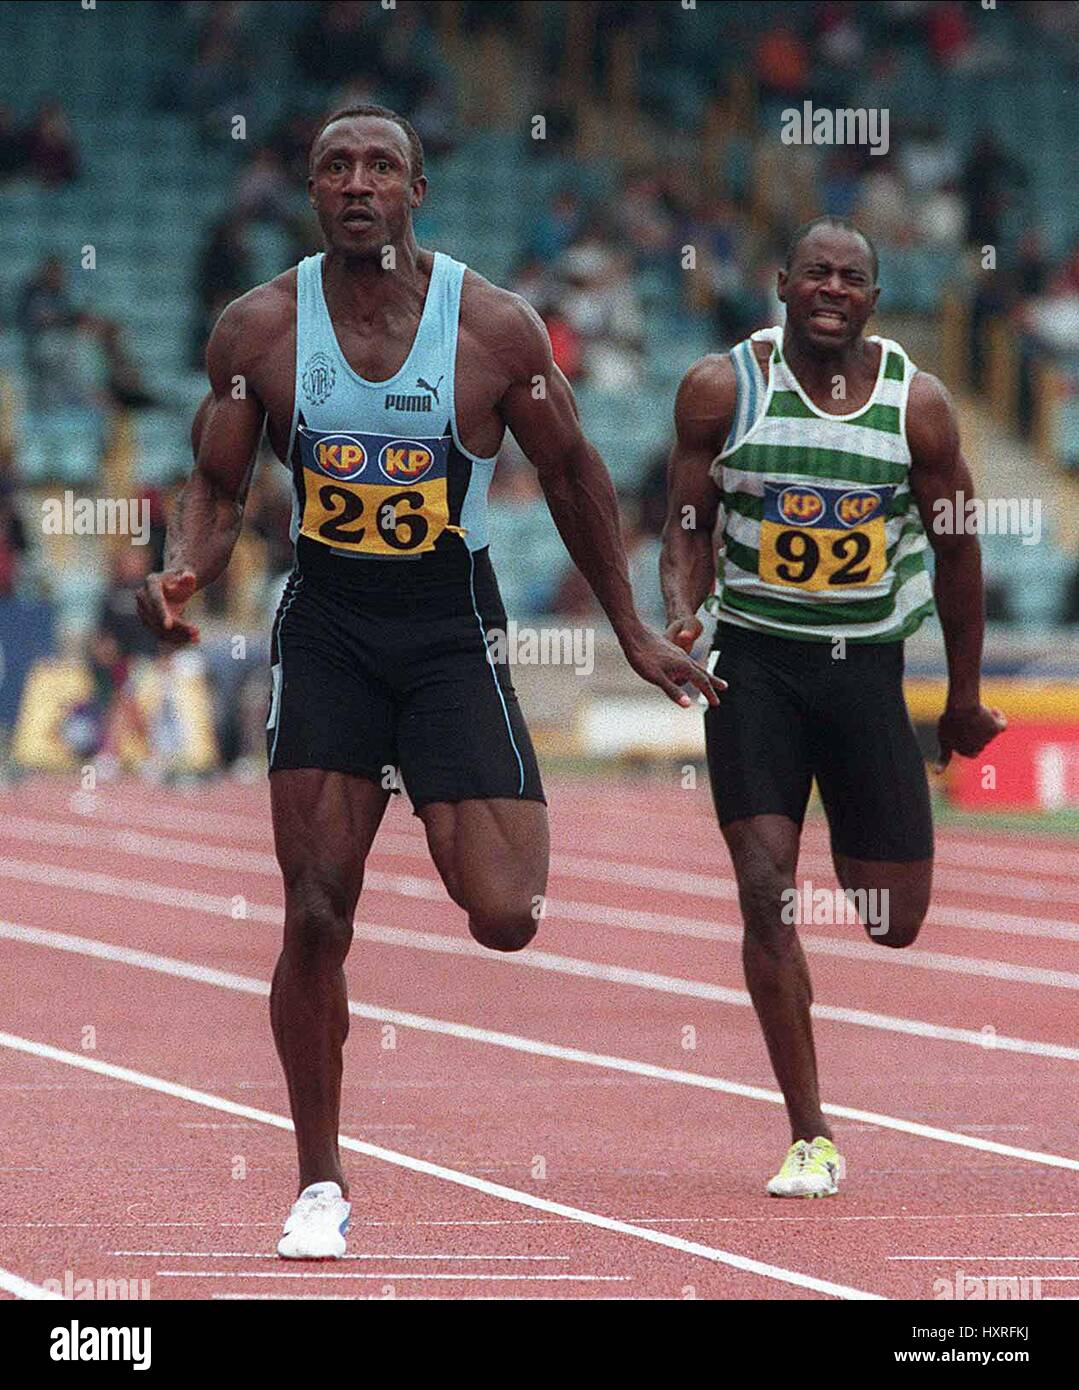 LINFORD CHRISTIE KP GAMES CRYSTAL PALACE KP GAMES CRYSTAL PALACE 15 July 1995 Stock Photo